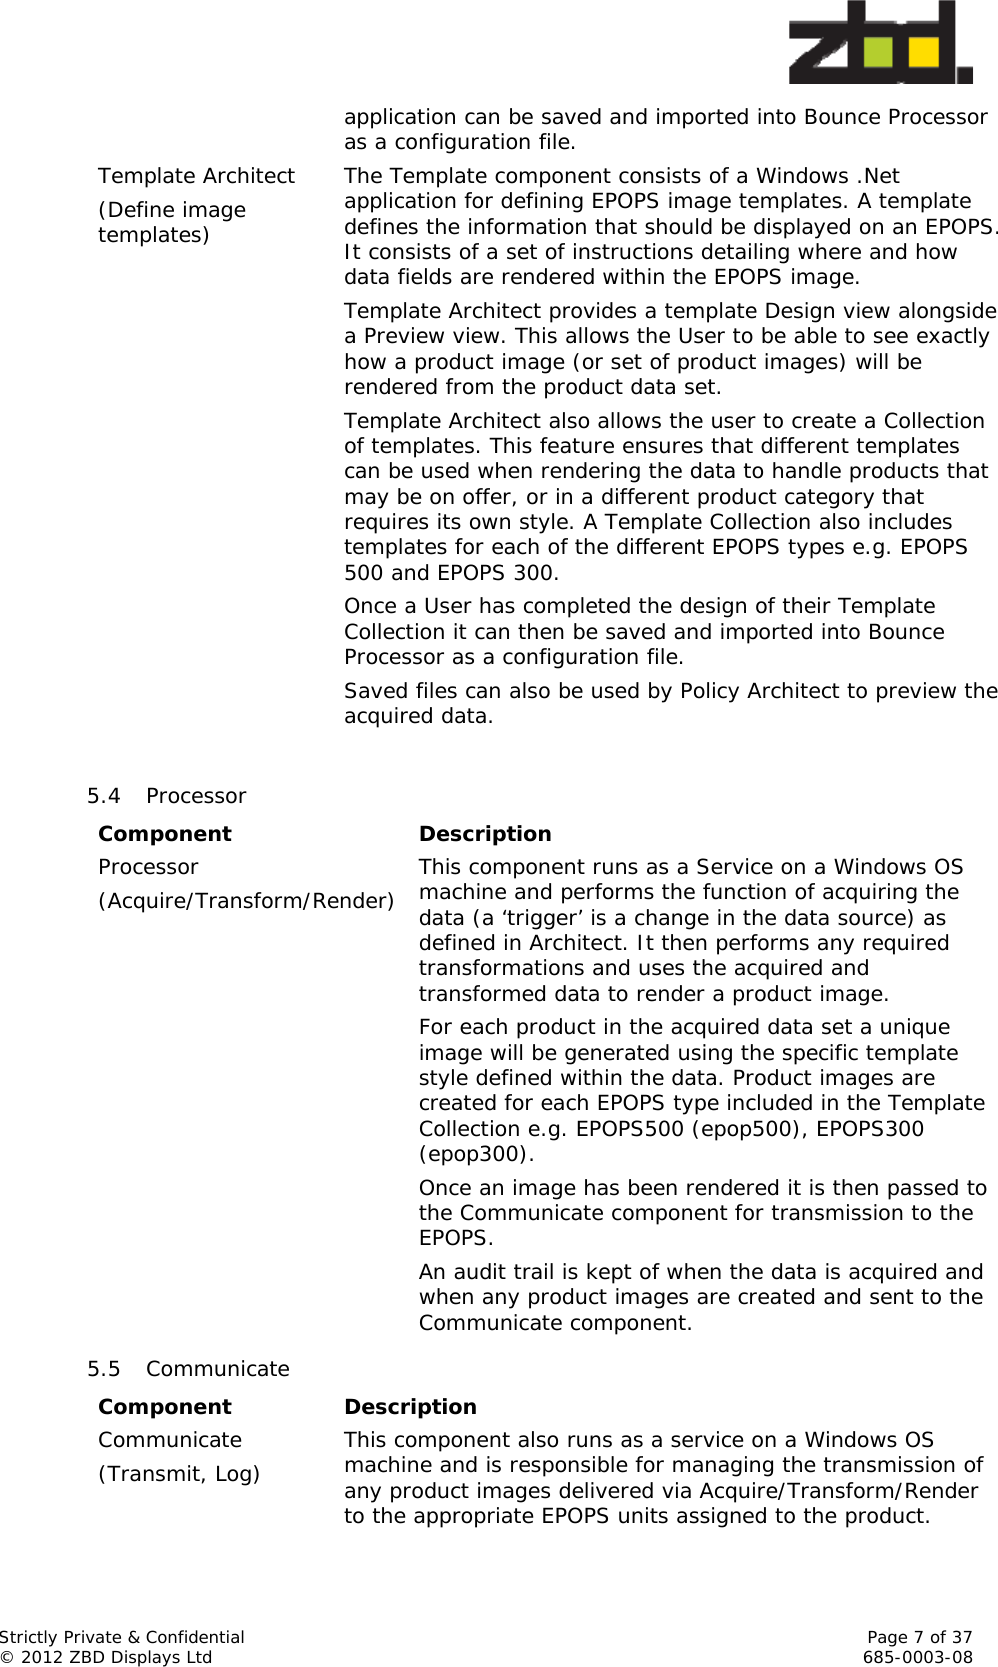  Strictly Private &amp; Confidential    Page 7 of 37 © 2012 ZBD Displays Ltd     685-0003-08 application can be saved and imported into Bounce Processor as a configuration file. Template Architect (Define image templates) The Template component consists of a Windows .Net application for defining EPOPS image templates. A template defines the information that should be displayed on an EPOPS. It consists of a set of instructions detailing where and how data fields are rendered within the EPOPS image. Template Architect provides a template Design view alongside a Preview view. This allows the User to be able to see exactly how a product image (or set of product images) will be rendered from the product data set. Template Architect also allows the user to create a Collection of templates. This feature ensures that different templates can be used when rendering the data to handle products that may be on offer, or in a different product category that requires its own style. A Template Collection also includes templates for each of the different EPOPS types e.g. EPOPS 500 and EPOPS 300. Once a User has completed the design of their Template Collection it can then be saved and imported into Bounce Processor as a configuration file. Saved files can also be used by Policy Architect to preview the acquired data.   5.4 Processor Component Description Processor (Acquire/Transform/Render) This component runs as a Service on a Windows OS machine and performs the function of acquiring the data (a ‘trigger’ is a change in the data source) as defined in Architect. It then performs any required transformations and uses the acquired and transformed data to render a product image. For each product in the acquired data set a unique image will be generated using the specific template style defined within the data. Product images are created for each EPOPS type included in the Template Collection e.g. EPOPS500 (epop500), EPOPS300 (epop300). Once an image has been rendered it is then passed to the Communicate component for transmission to the EPOPS. An audit trail is kept of when the data is acquired and when any product images are created and sent to the Communicate component. 5.5 Communicate Component Description Communicate (Transmit, Log)  This component also runs as a service on a Windows OS machine and is responsible for managing the transmission of any product images delivered via Acquire/Transform/Render to the appropriate EPOPS units assigned to the product. 